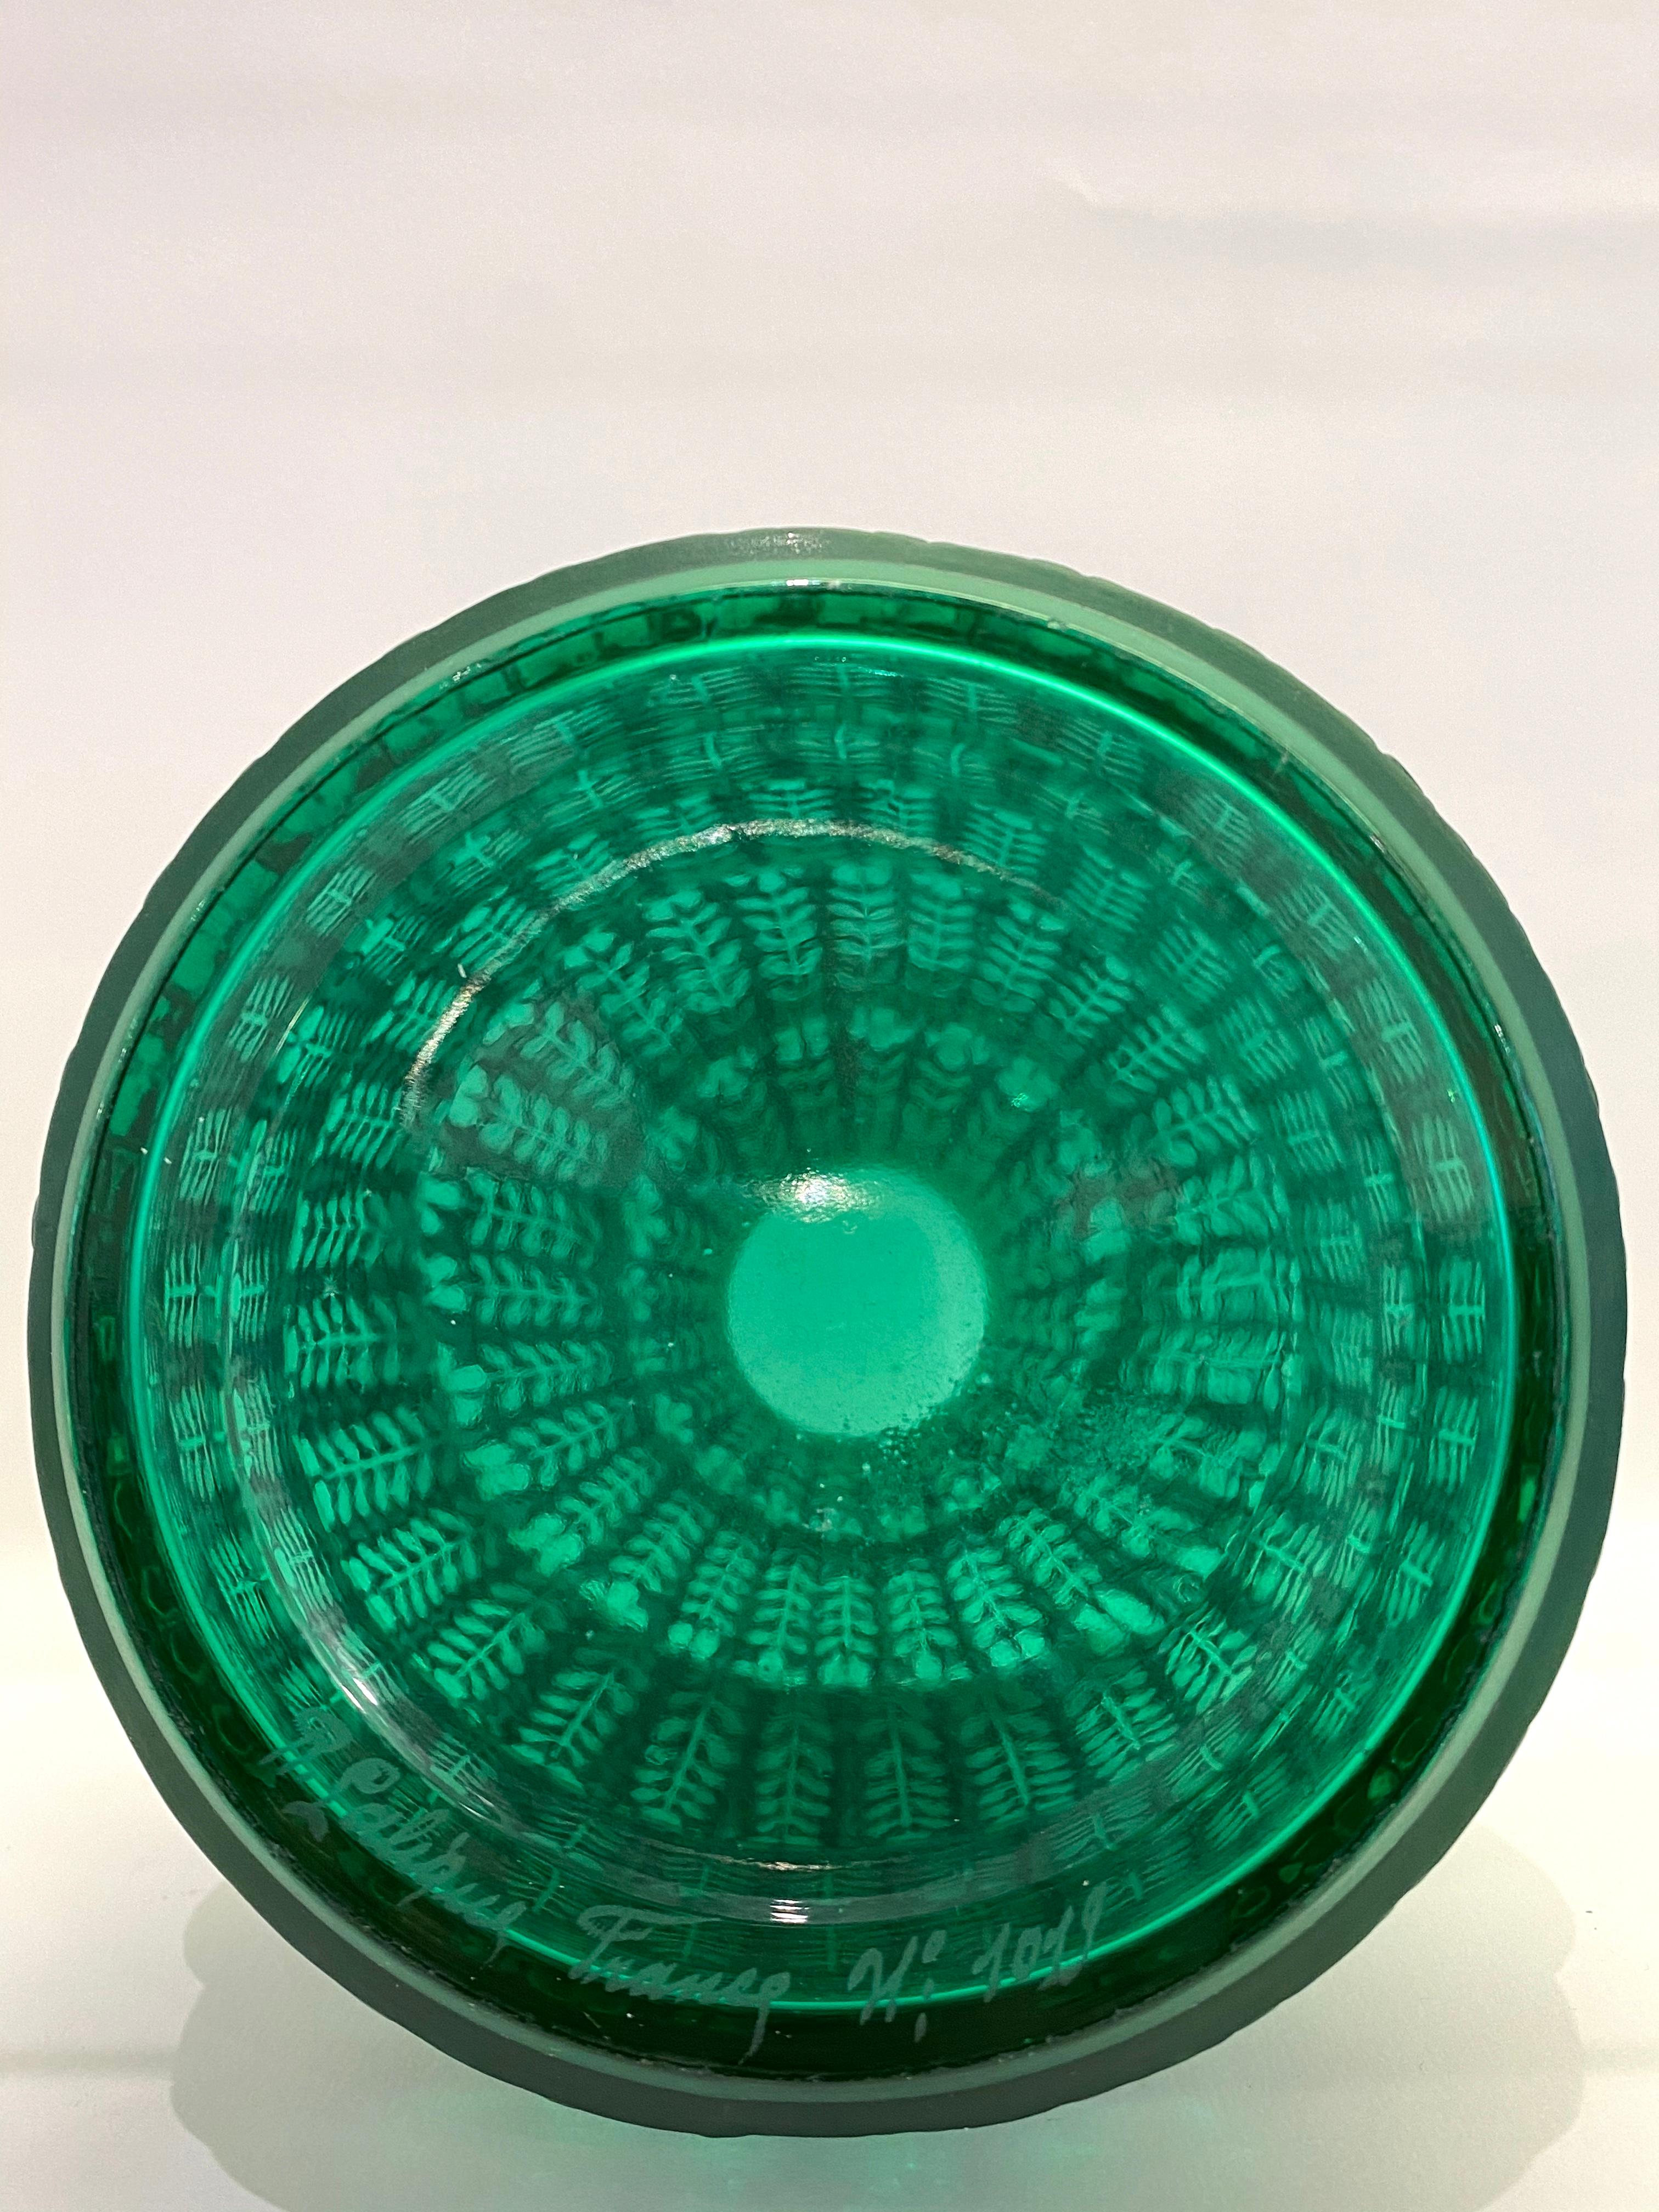 Molded 1929 René Lalique Ferrieres Vase in Emerald Green Glass with Black Patina